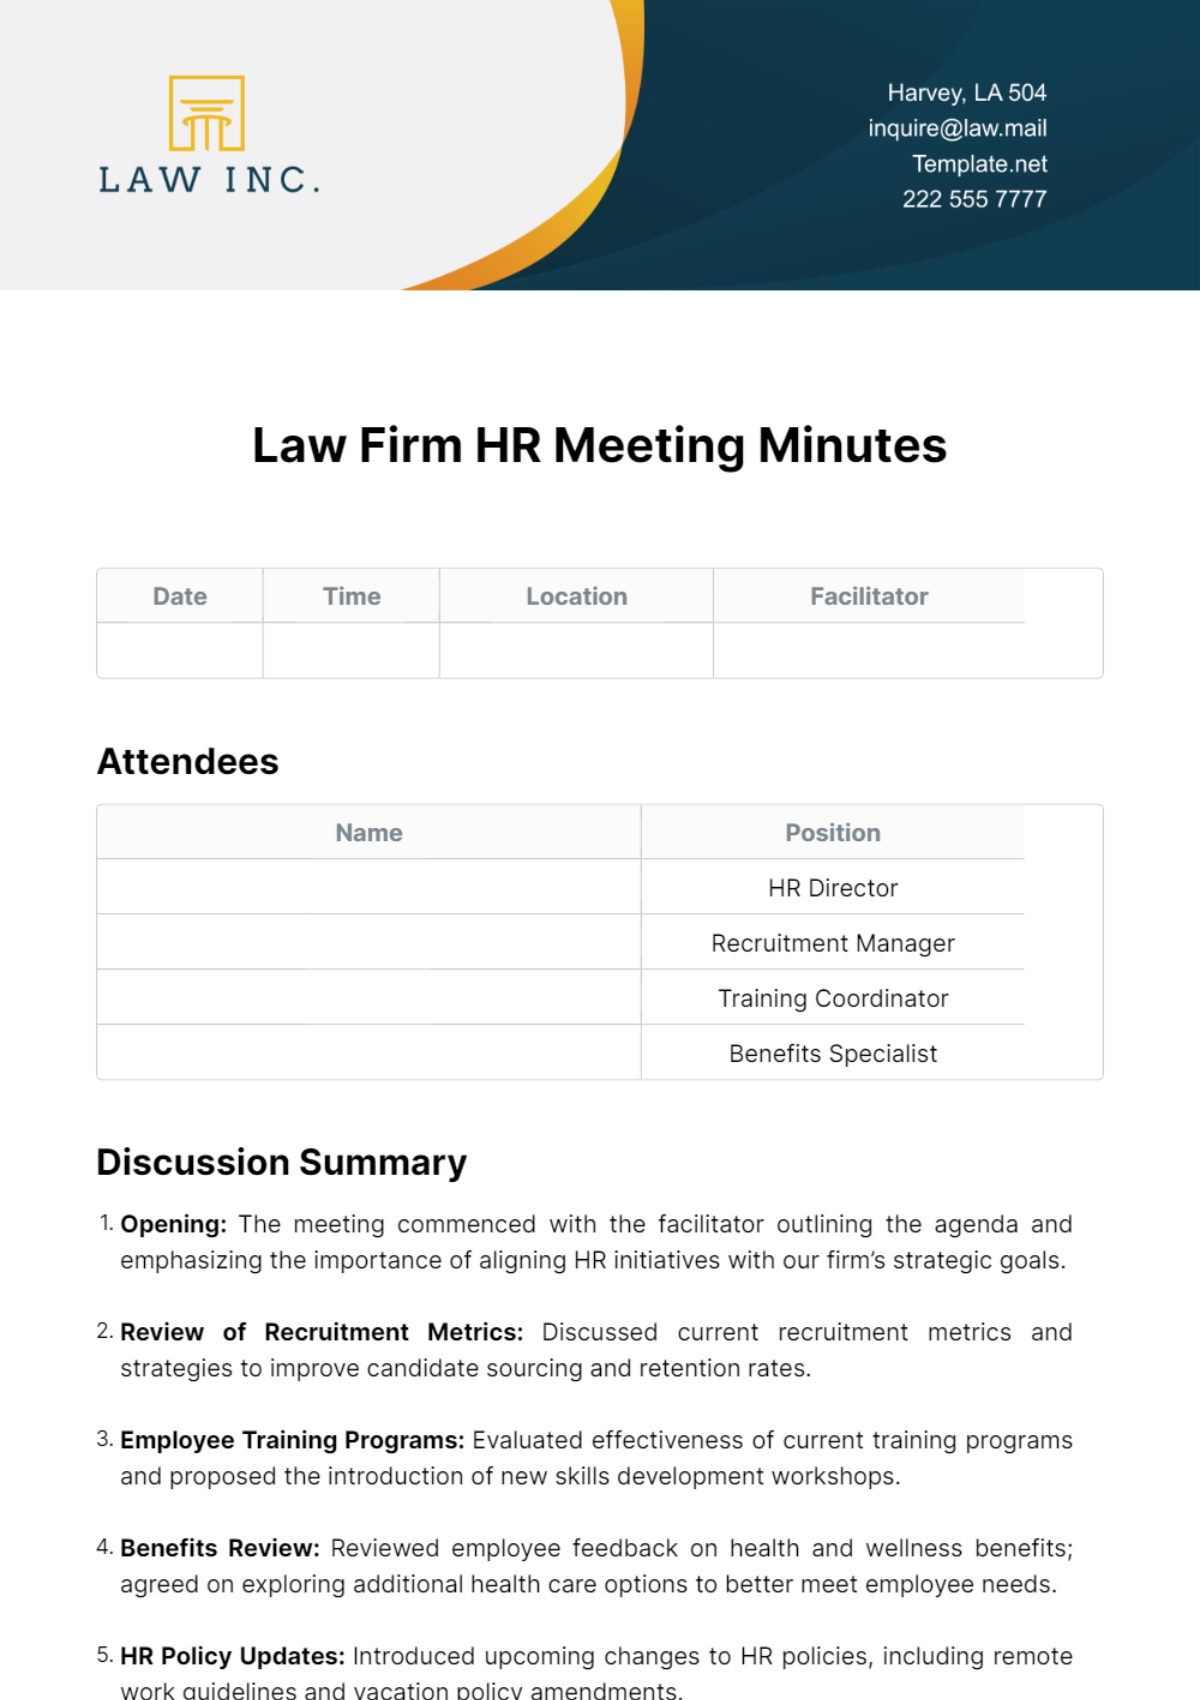 Free Law Firm HR Meeting Minutes Template